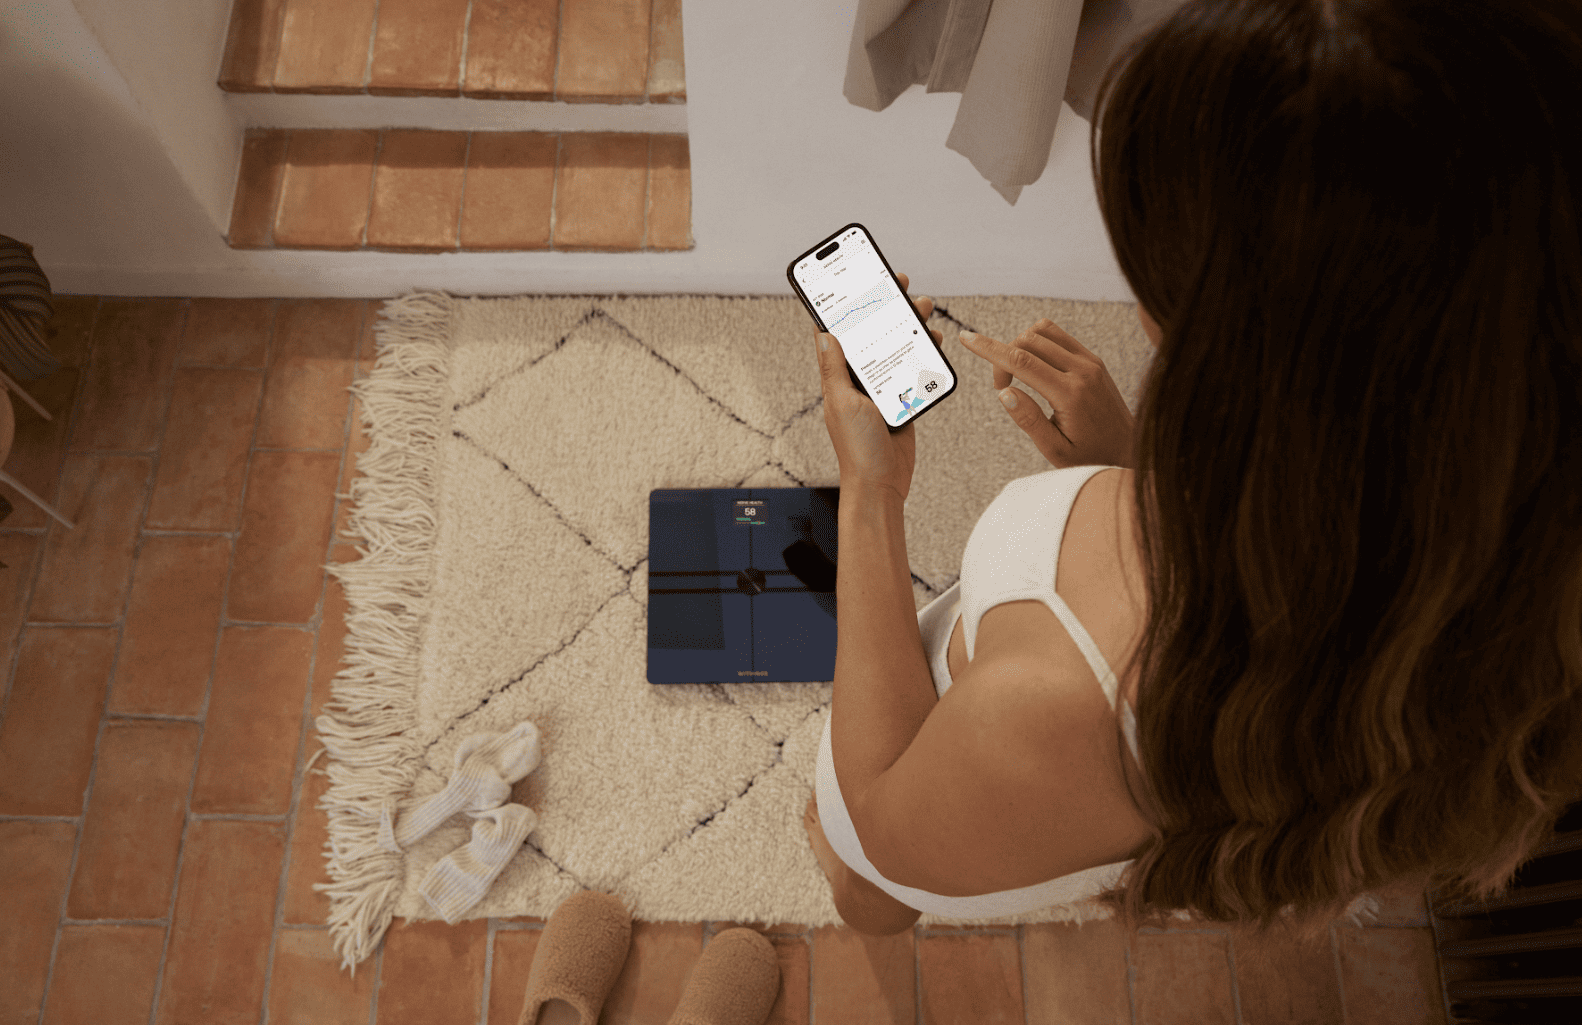 Withings' latest smart scale features an 'eyes closed' mode - The